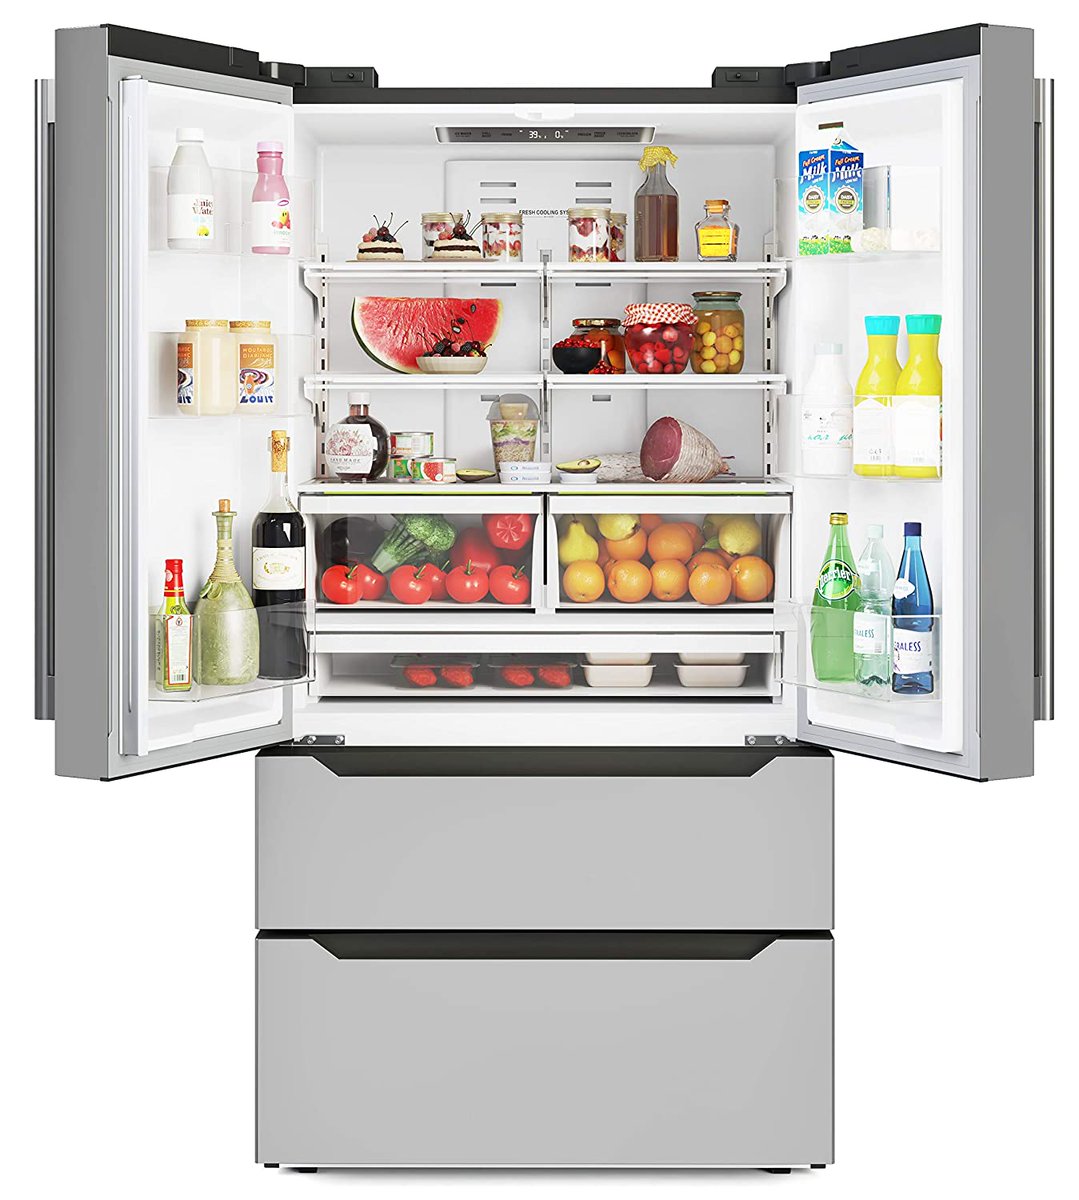 The best bottom freezer refrigerator without ice maker for 2022
wildriverreview.com/best-bottom-fr…...
#household #home #electronics #appliances #kitchen #boschrefrigerator #outdoorrefrigerator #truckrefrigerator #undercounterrefrigerator #chestfreezer #portablerefrigerator